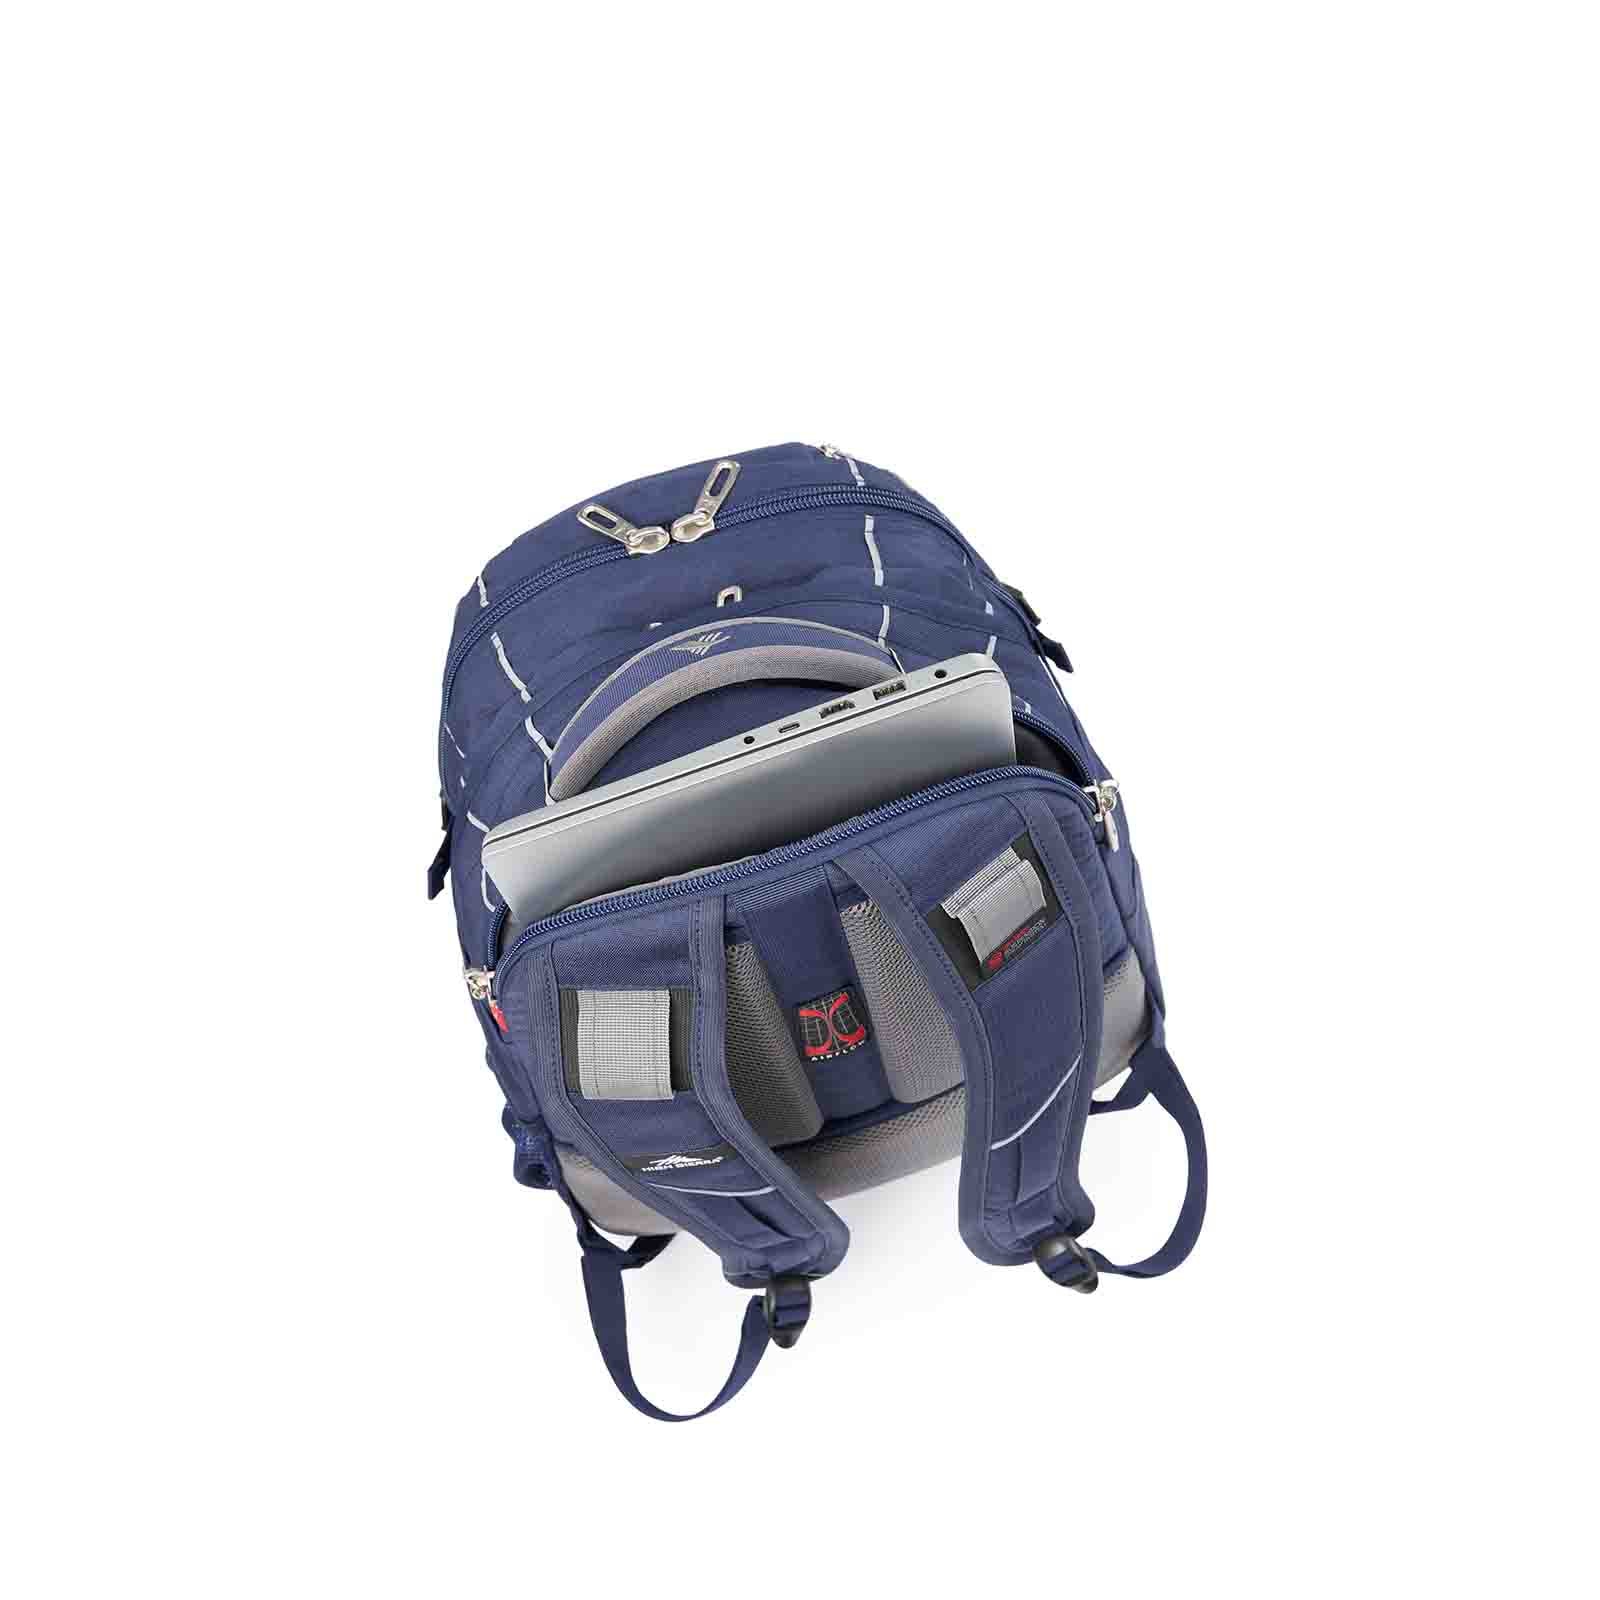 High-Sierra-Access-3-Eco-16-Inch-Laptop-Backpack-Marine-Blue-Laptop-Pouch